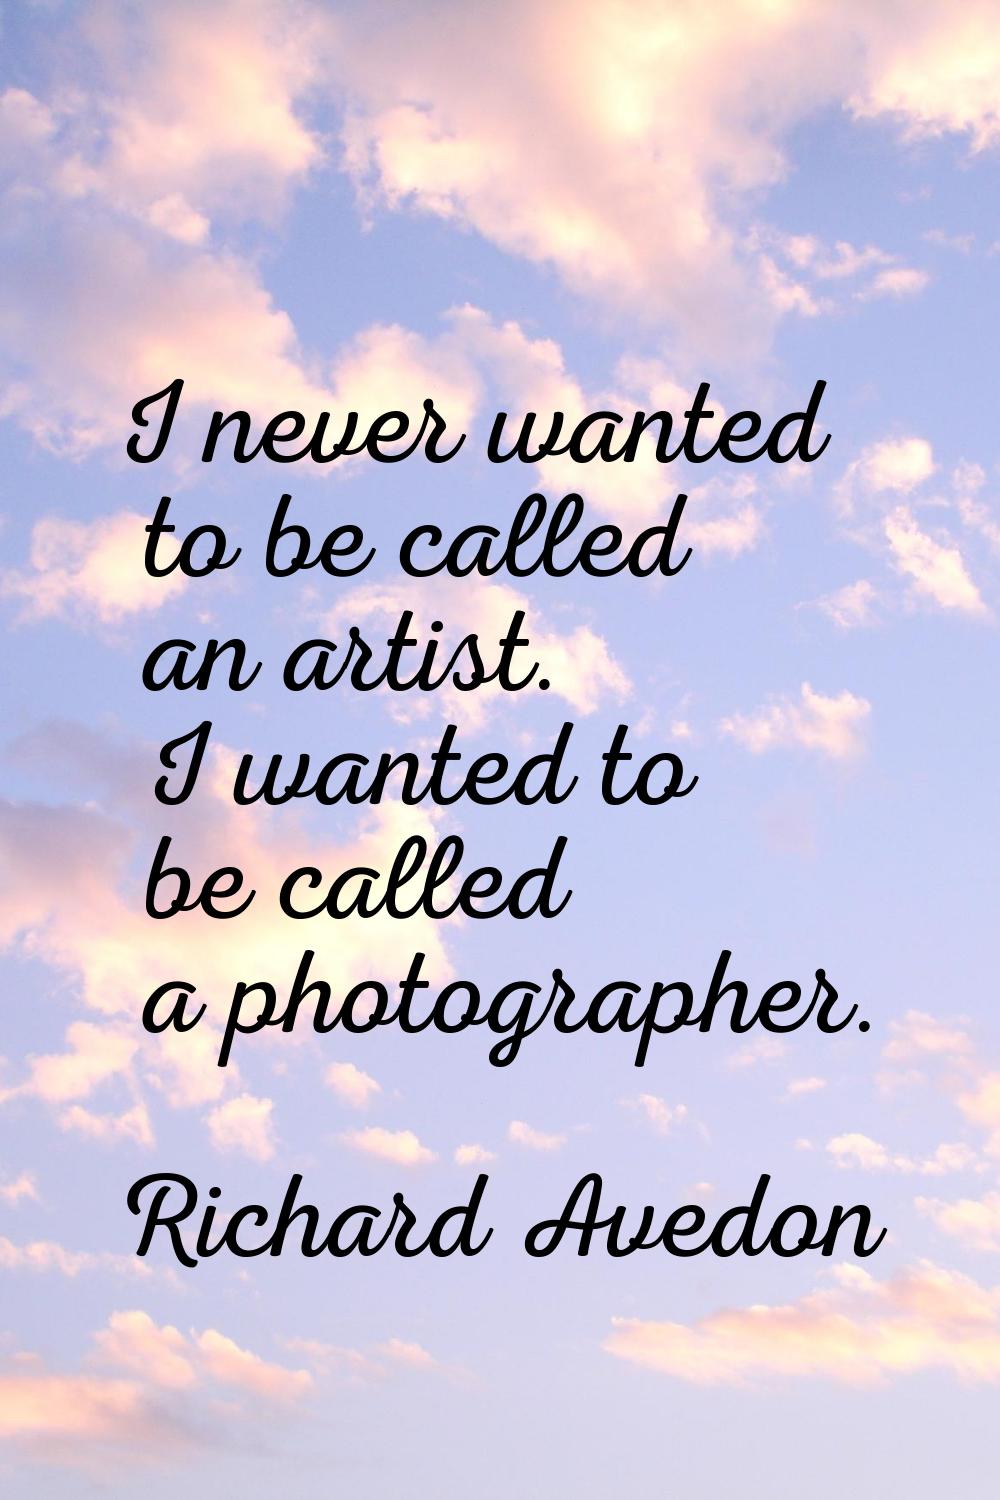 I never wanted to be called an artist. I wanted to be called a photographer.